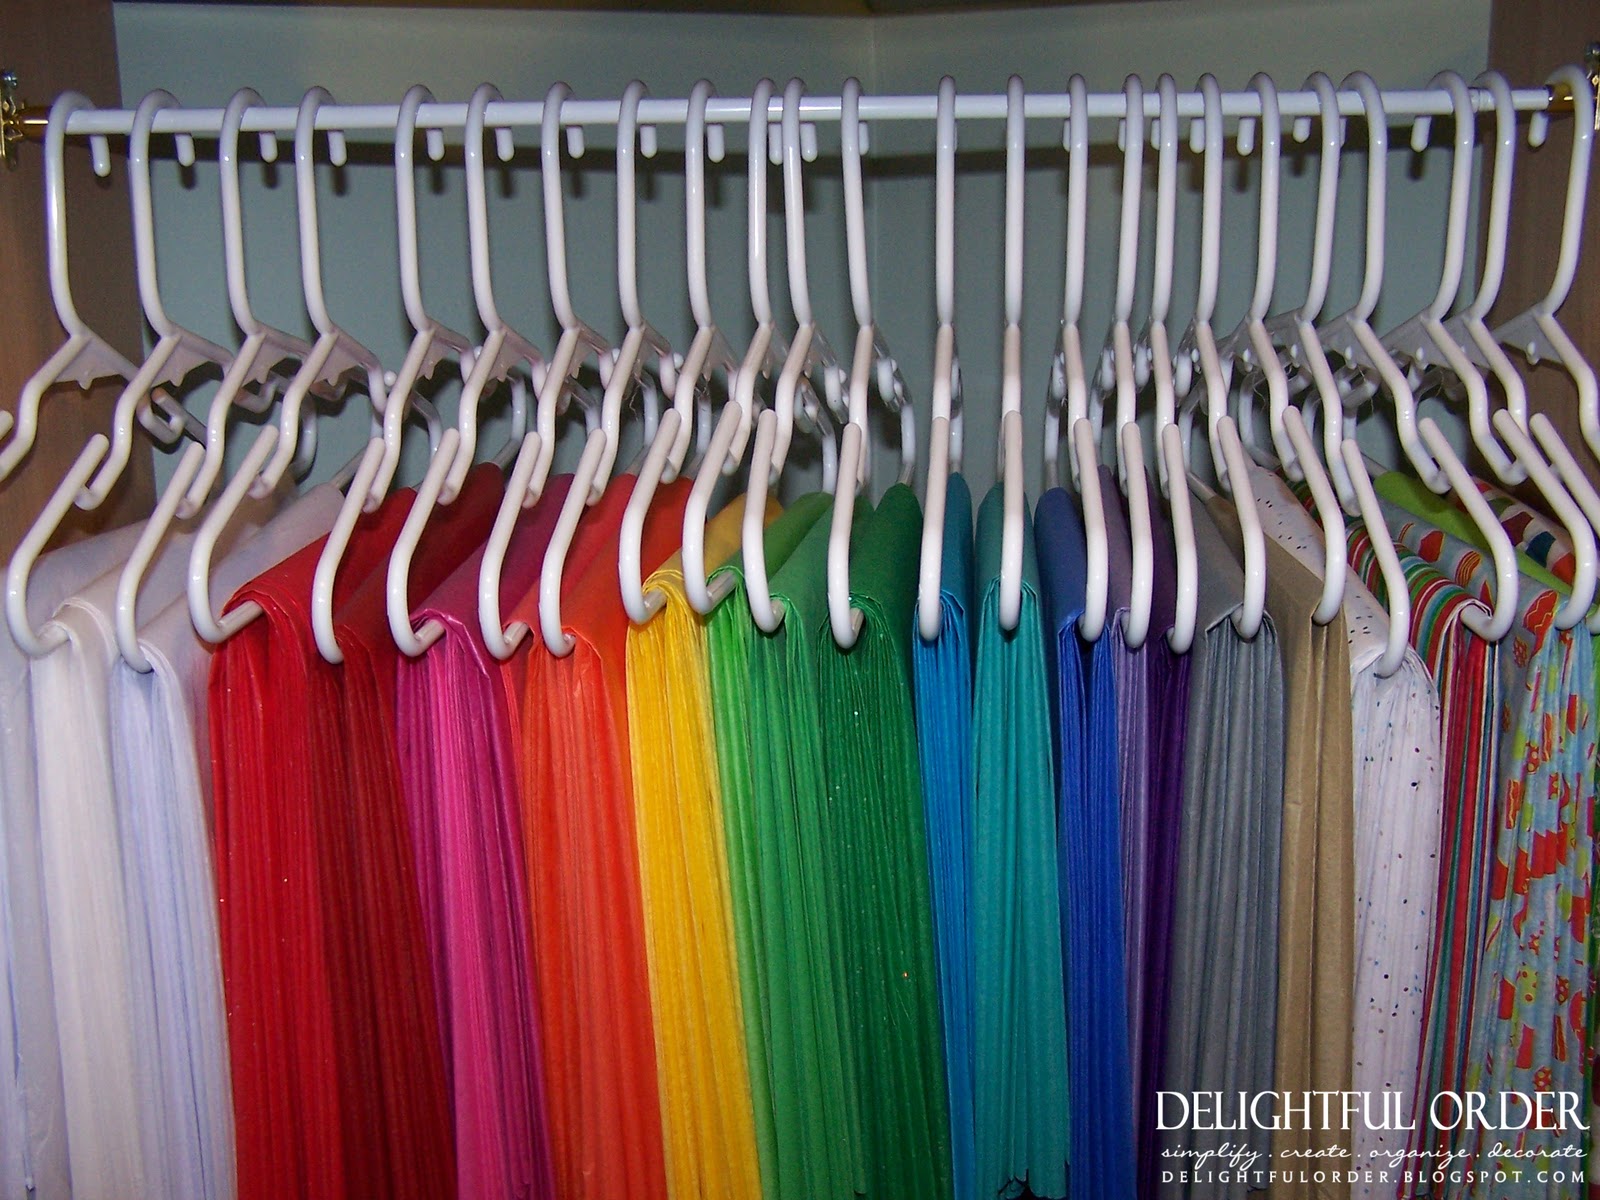 White clothes hangers are storing various colors of tissue paper in a closet.